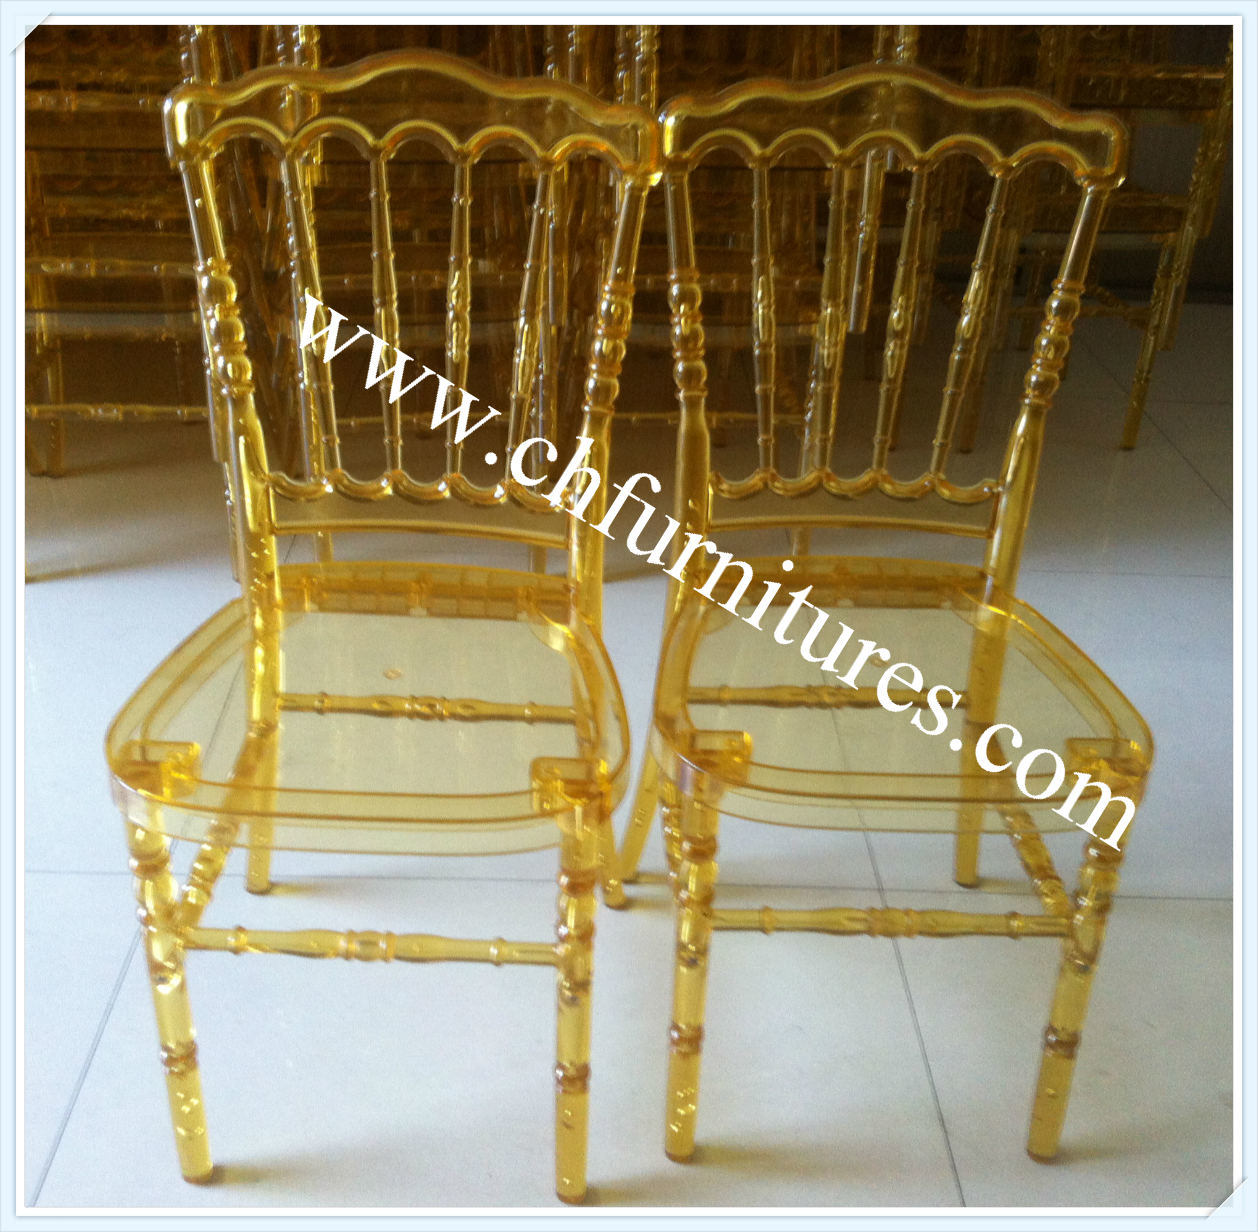 Kd Gold Transparent Napoleon Plastic Chair for Rental and Banquet (YC-P23-1)